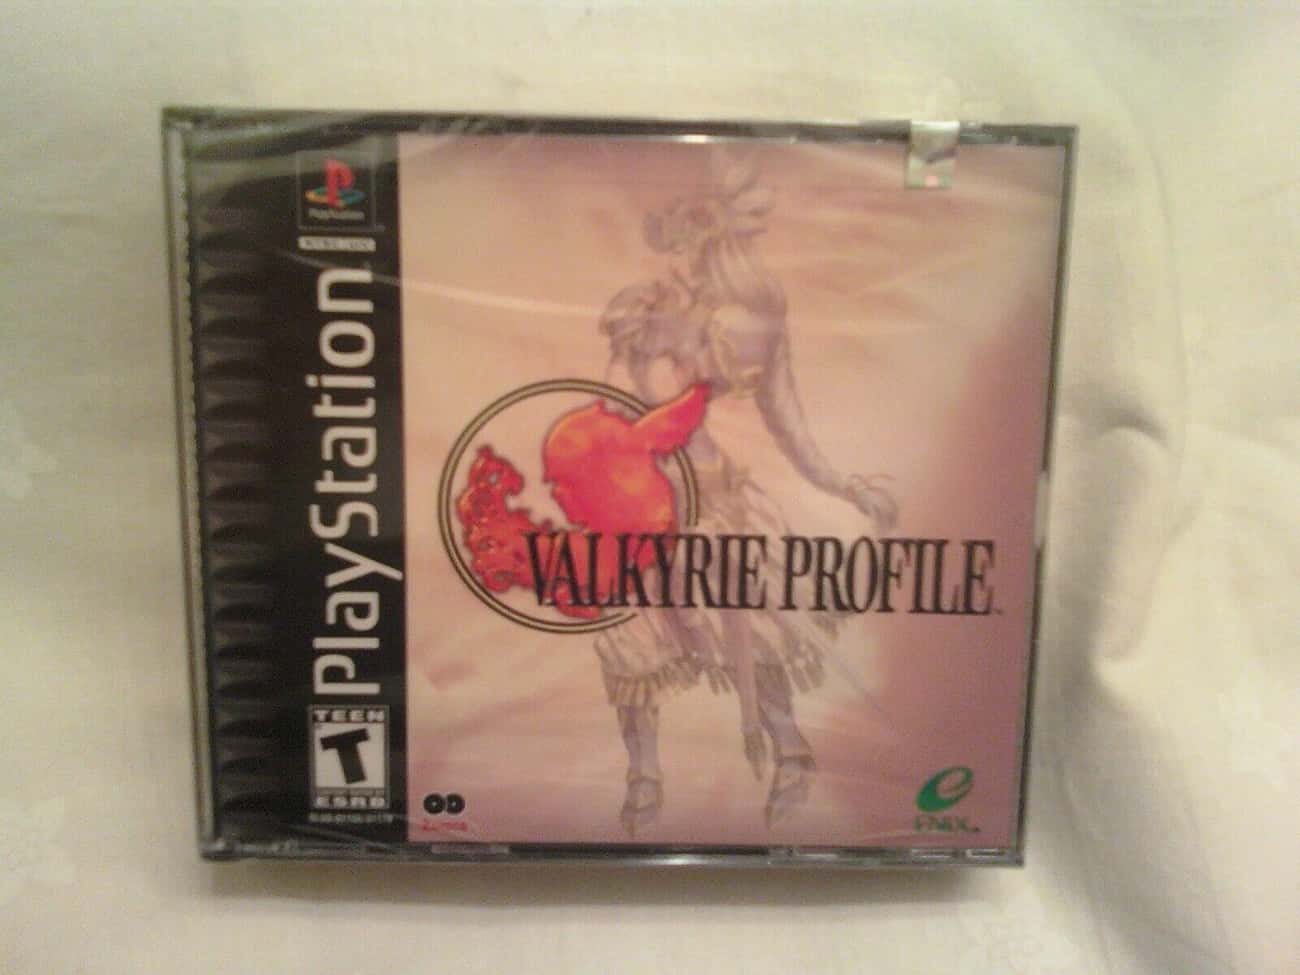 'Valkyrie Profile' Sold For $460